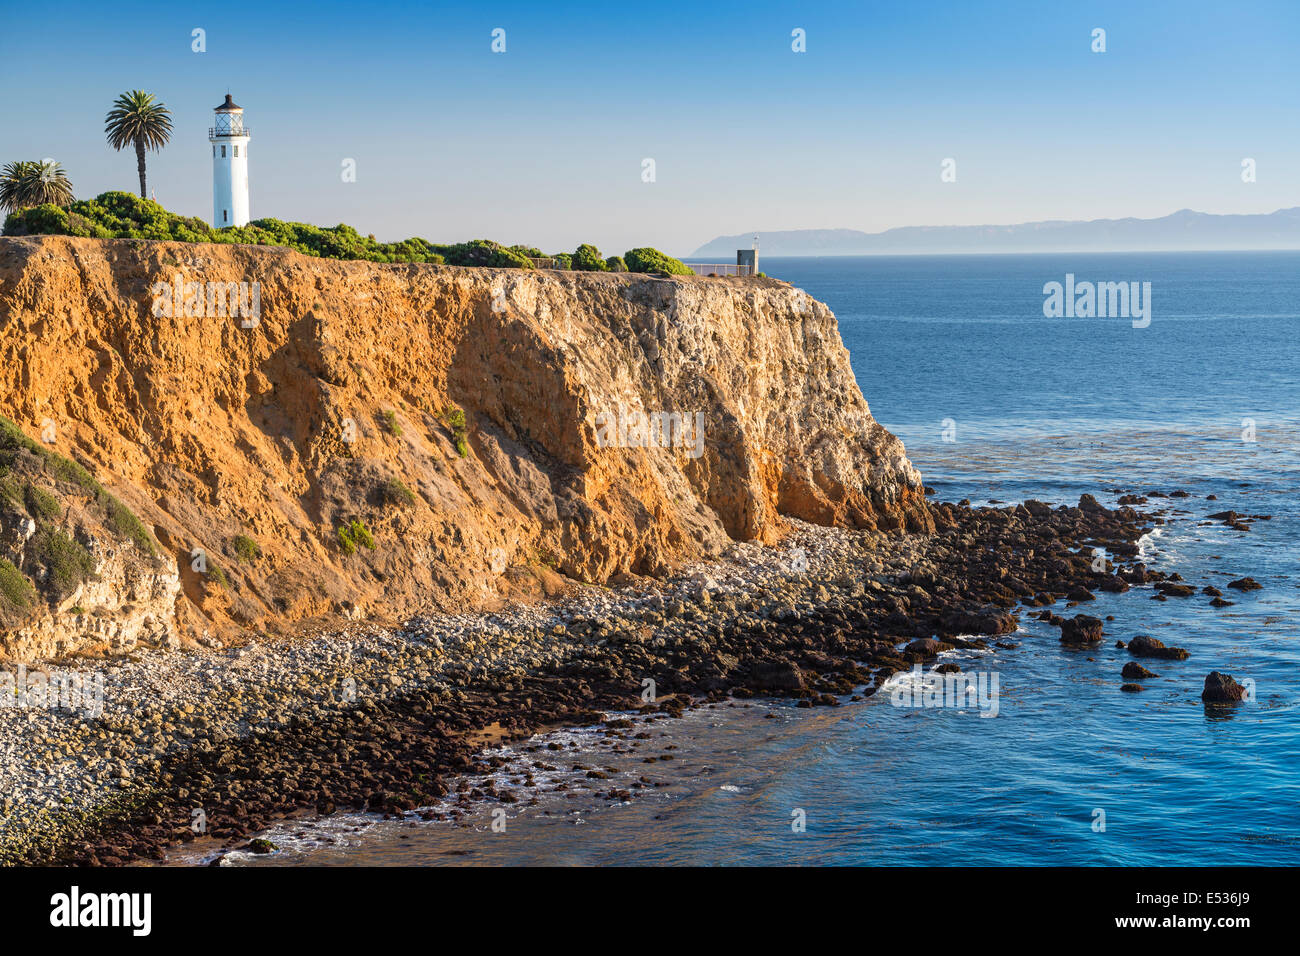 Los Angeles, California, USA at Point Vicente Lighthouse in Rancho Palos Verdes. Stock Photo